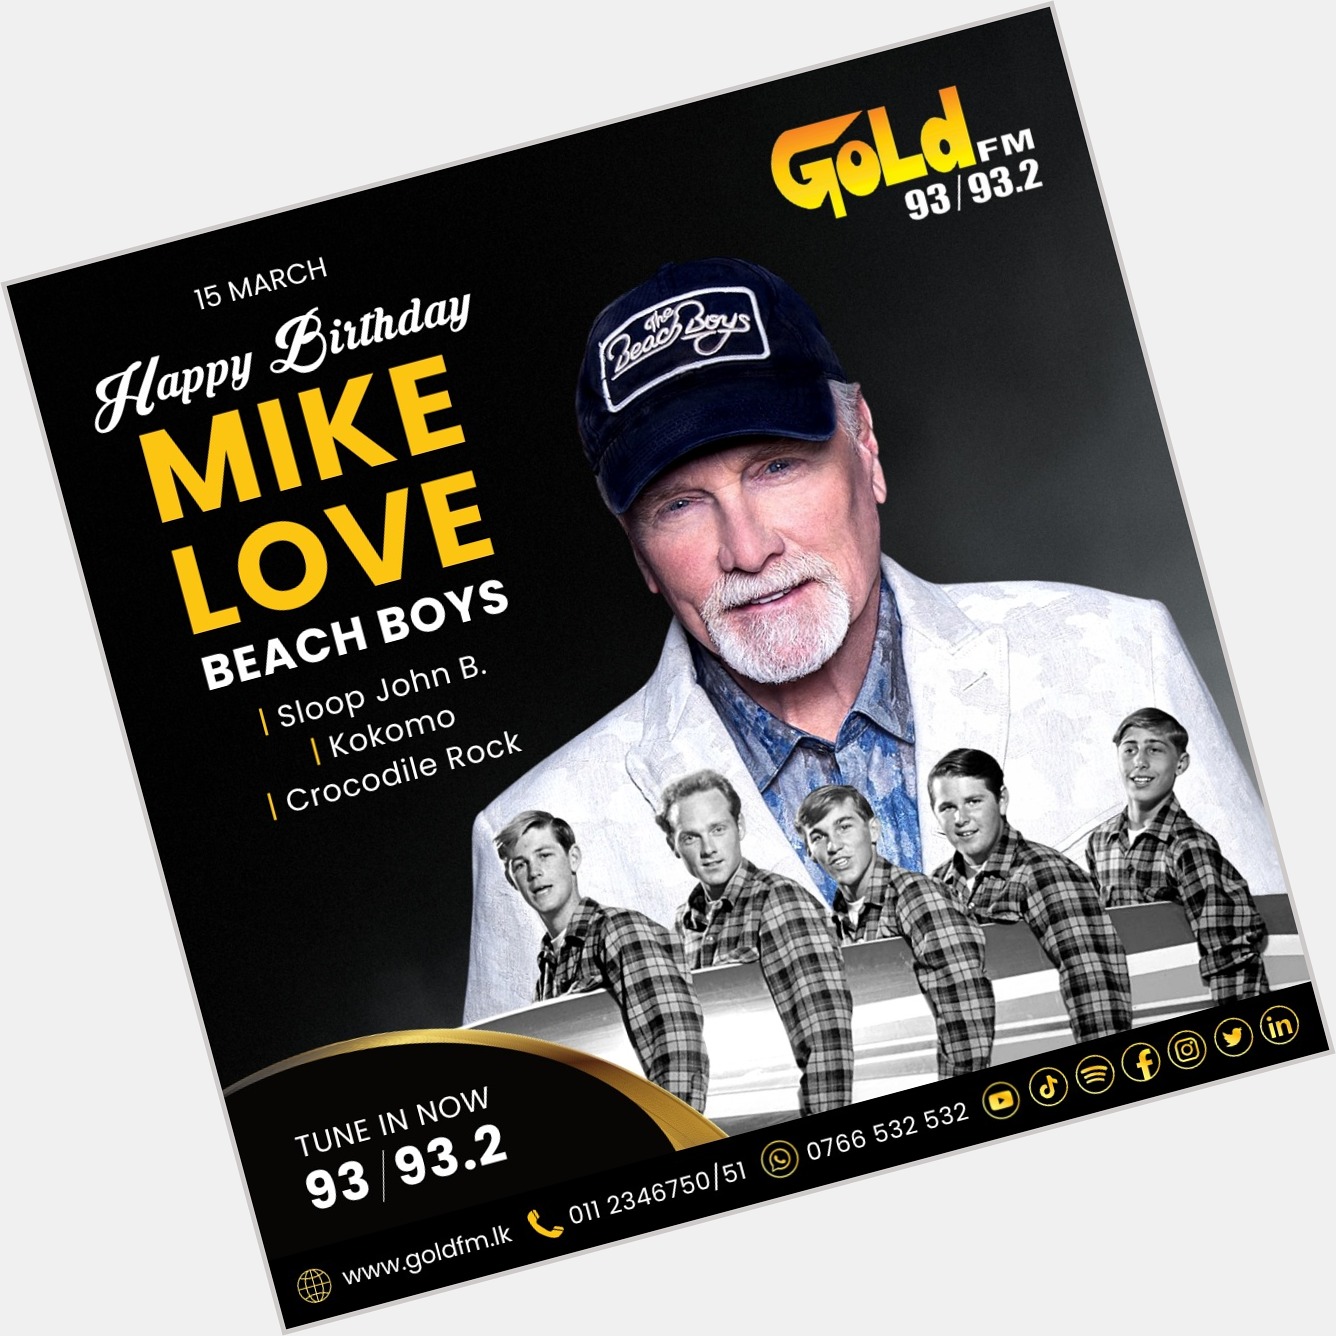 HAPPY BIRTHDAY TO MIKE LOVE TUNE IN NOW 93 / 93.2 Island wide      